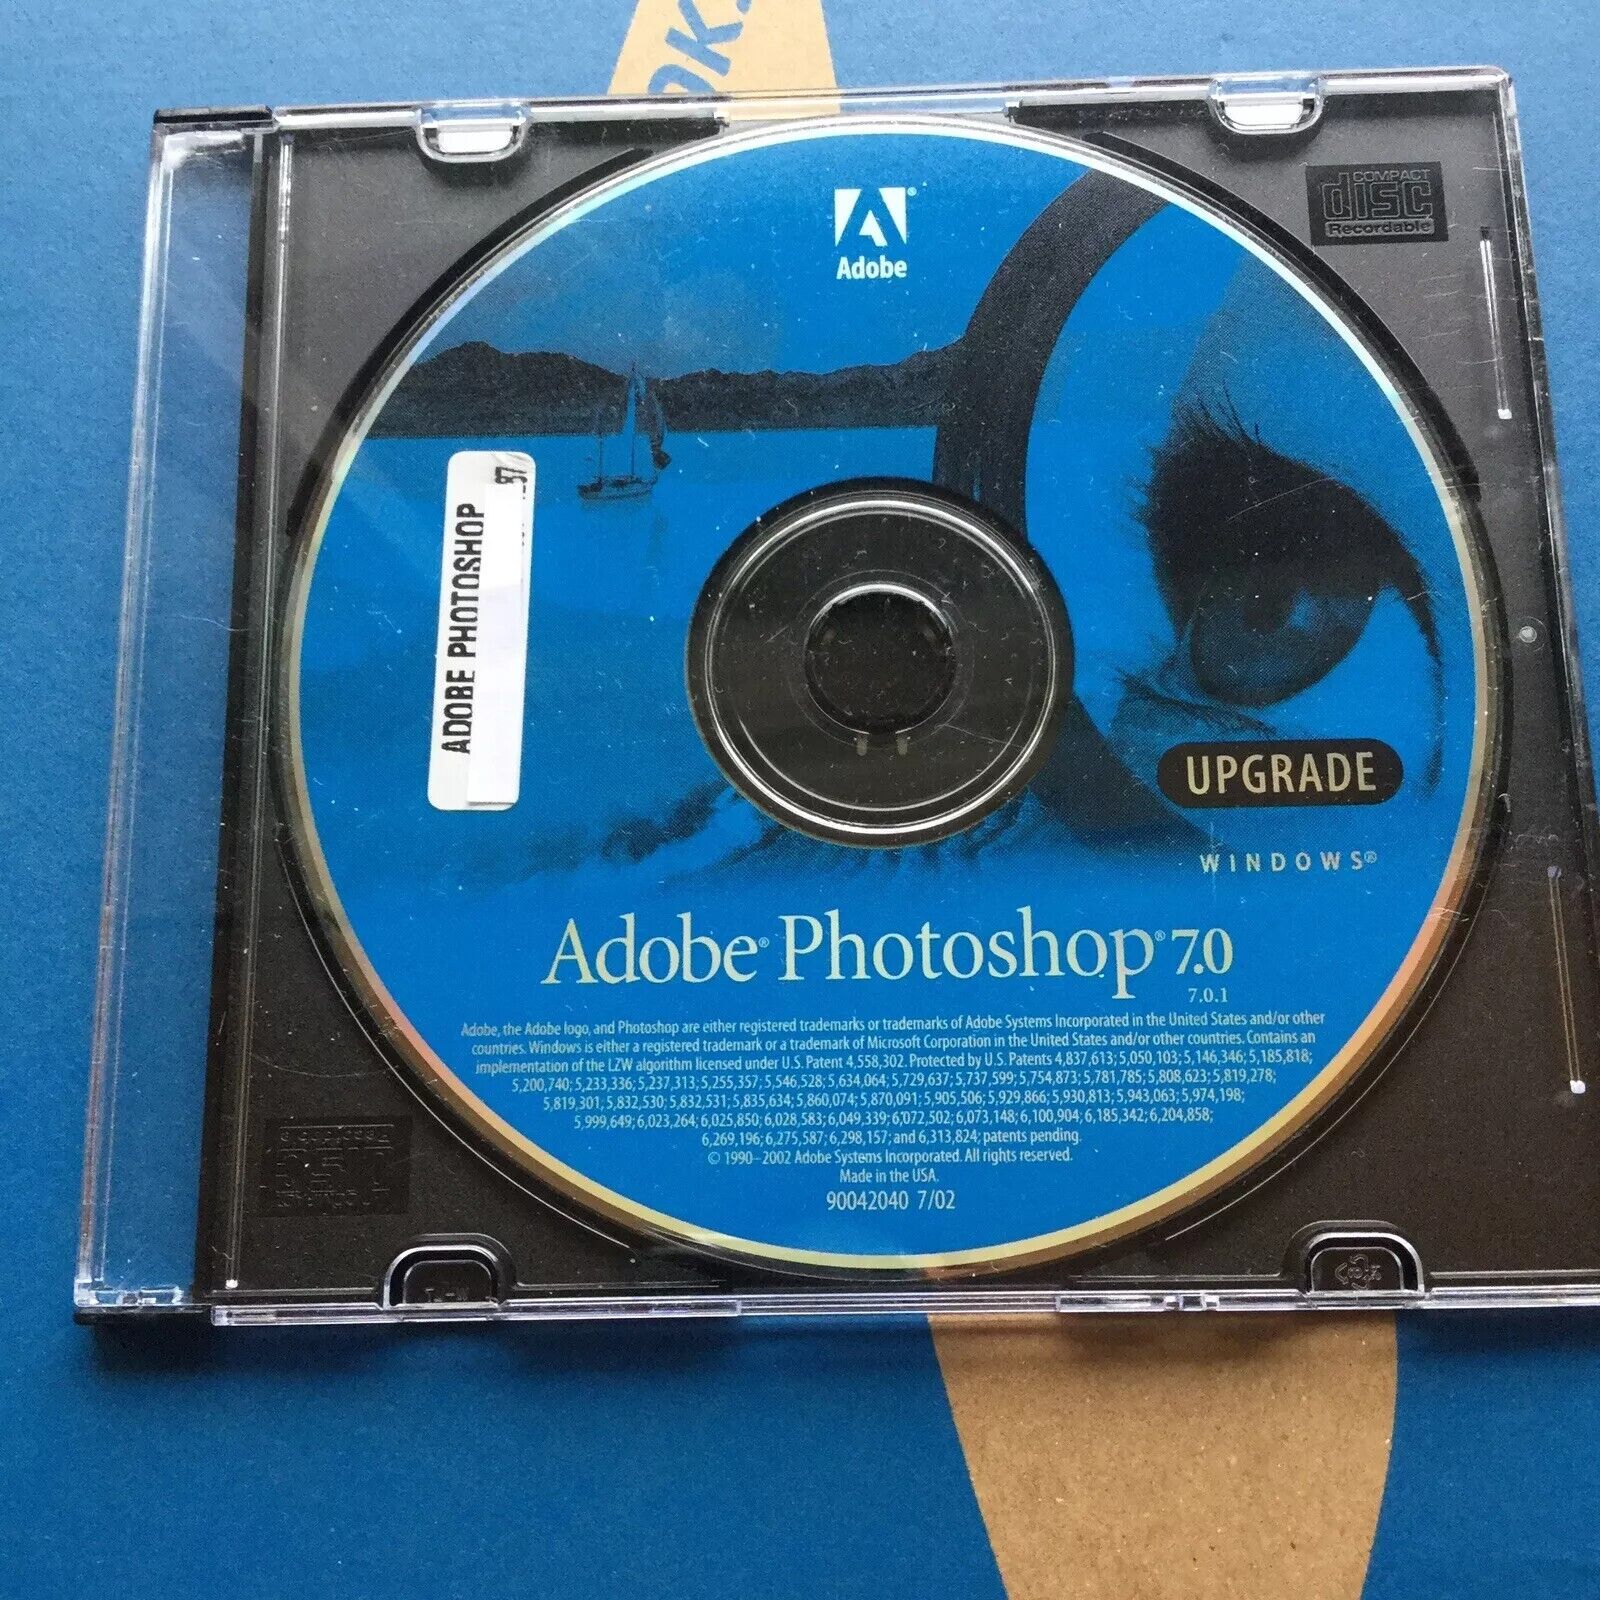 Adobe Photoshop 7.0 7 for Windows Upgrade Disc with Photoshop 5.5 Disc